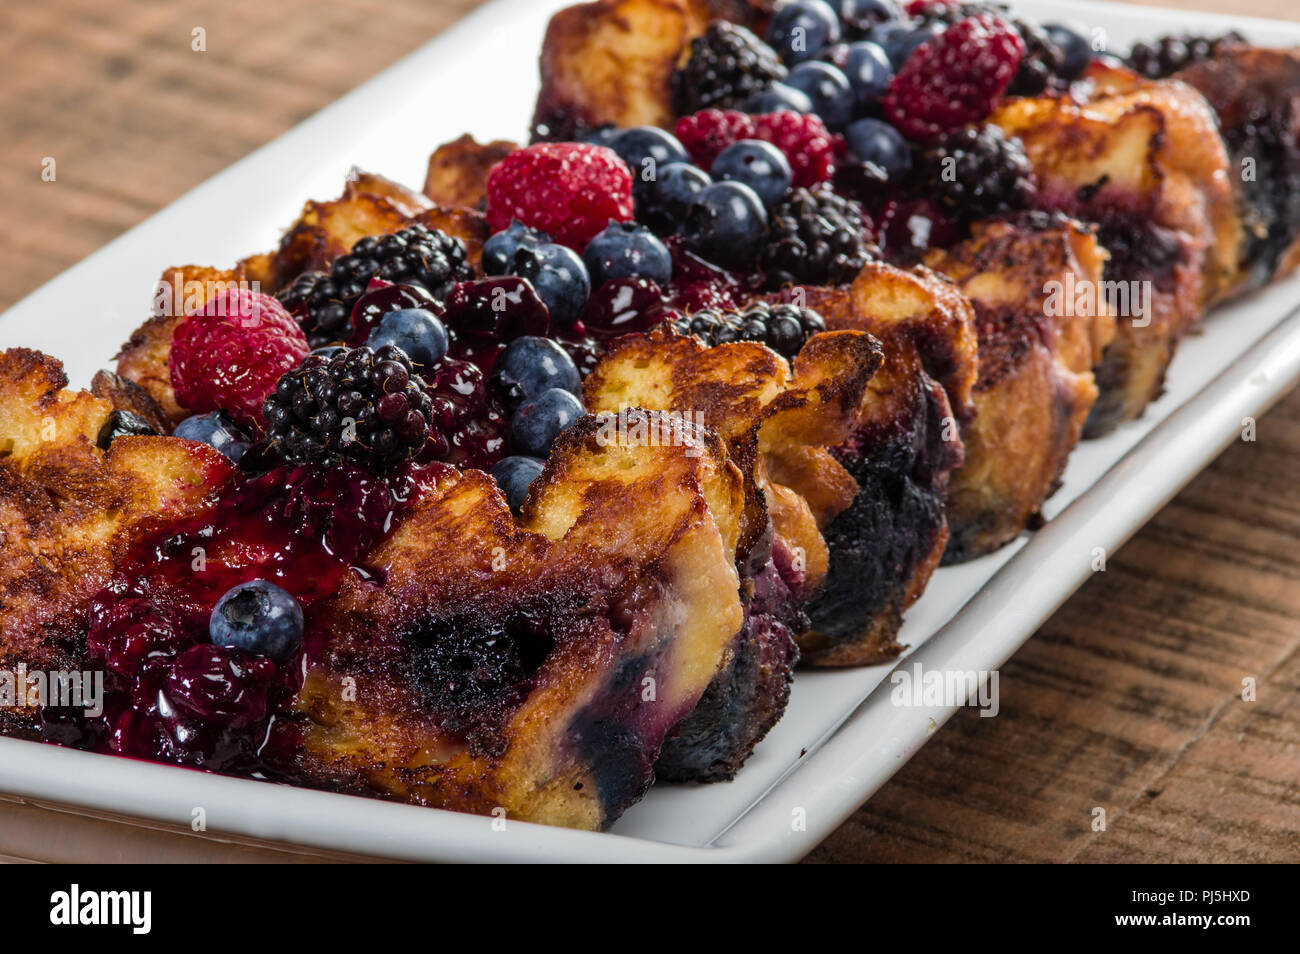 Bread pudding topped with fresh fruit Stock Photo